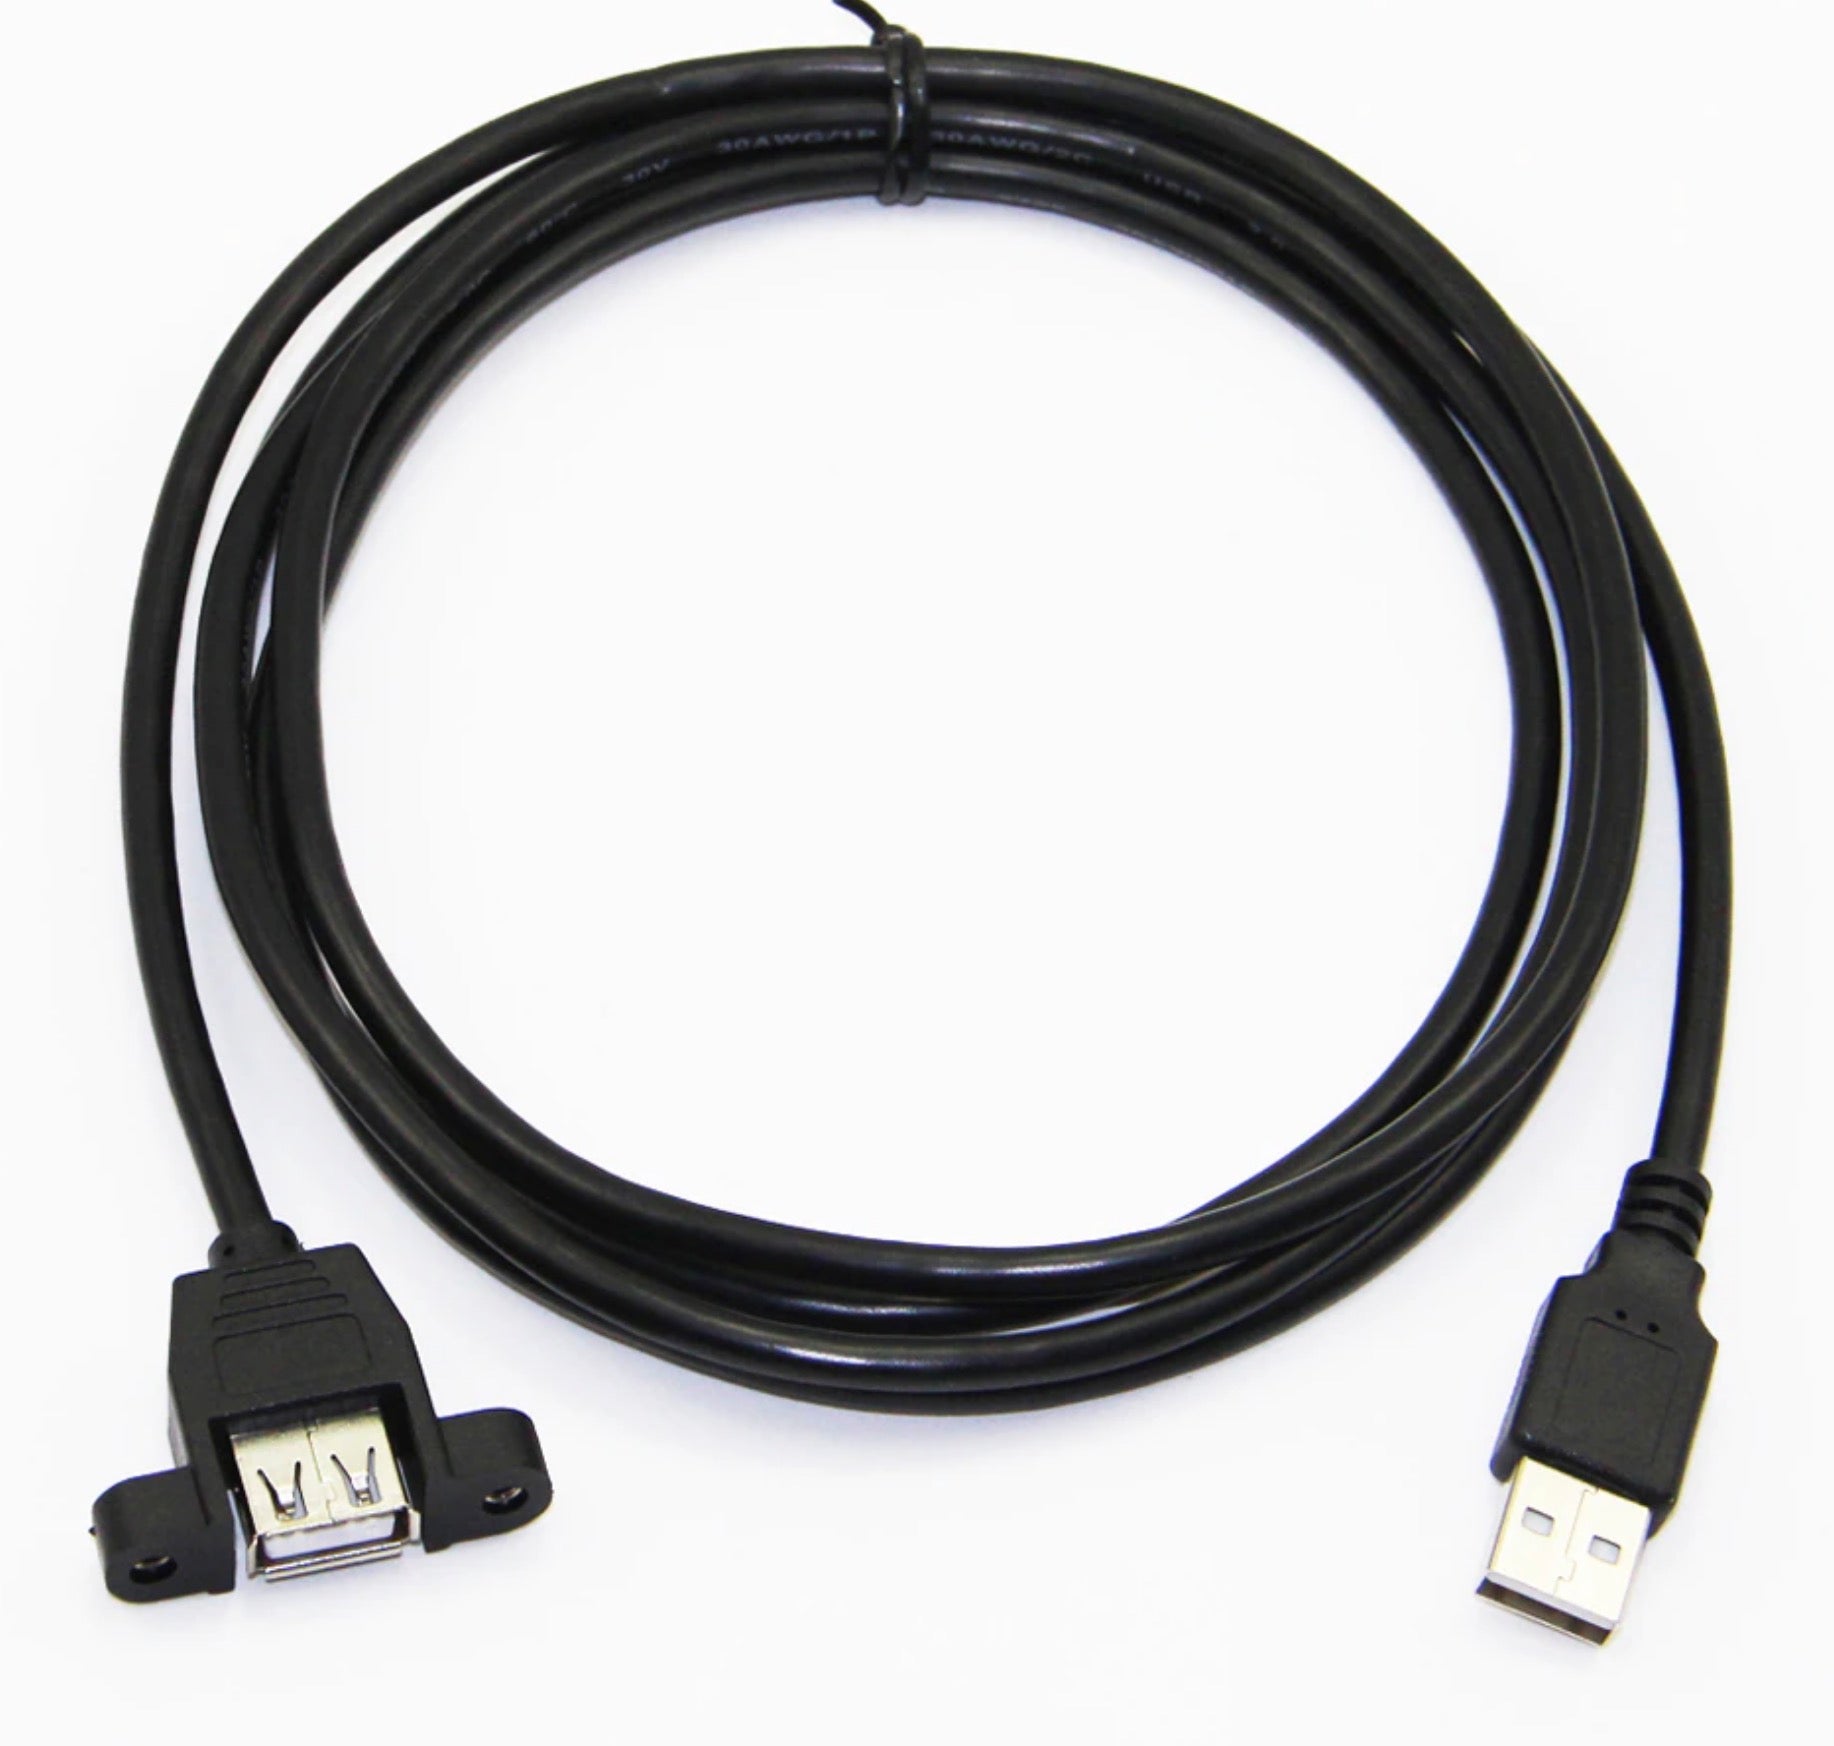 USB 2.0 Type A Male to Female Panel Mount Cable